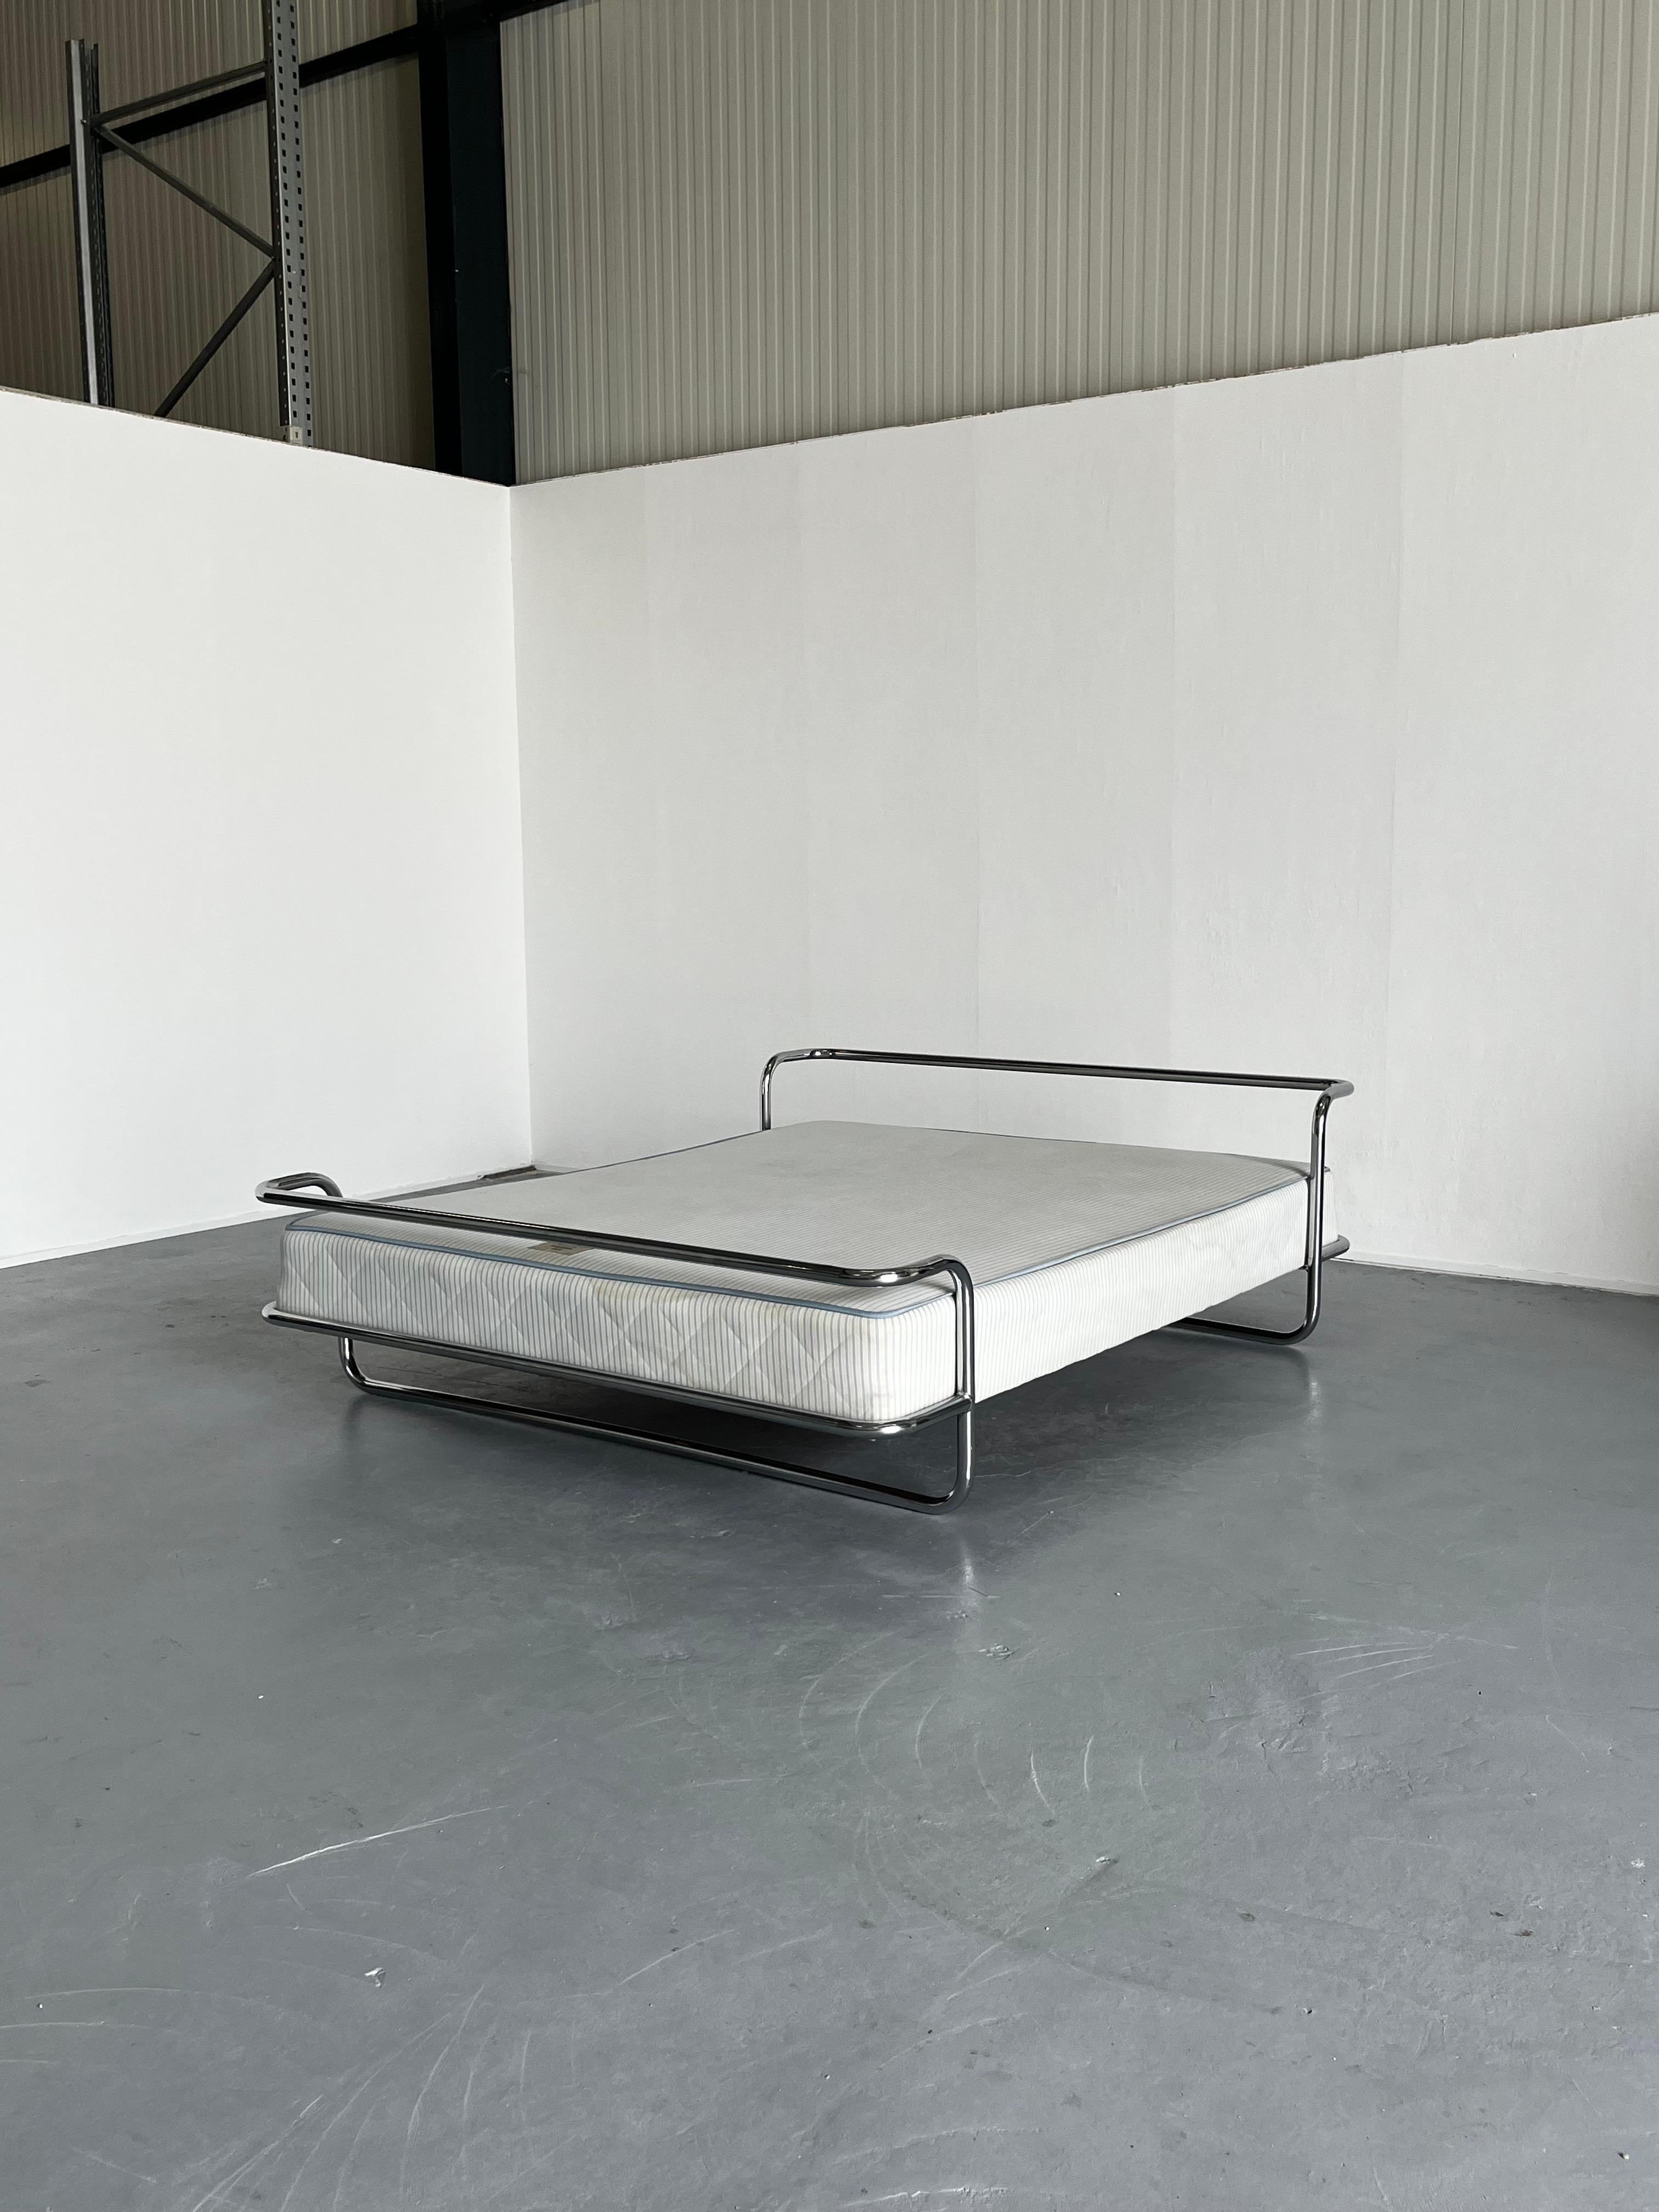 The iconic and rare vintage Ikea KROMVIK chrome king-size bed with the original SULTAN sprung mattress, designed by Knut Hagberg, 1982.

The modernist form takes clear inspiration from Swedish architect Bruno Mathsson’s 1974 Ulla bed. Designed to